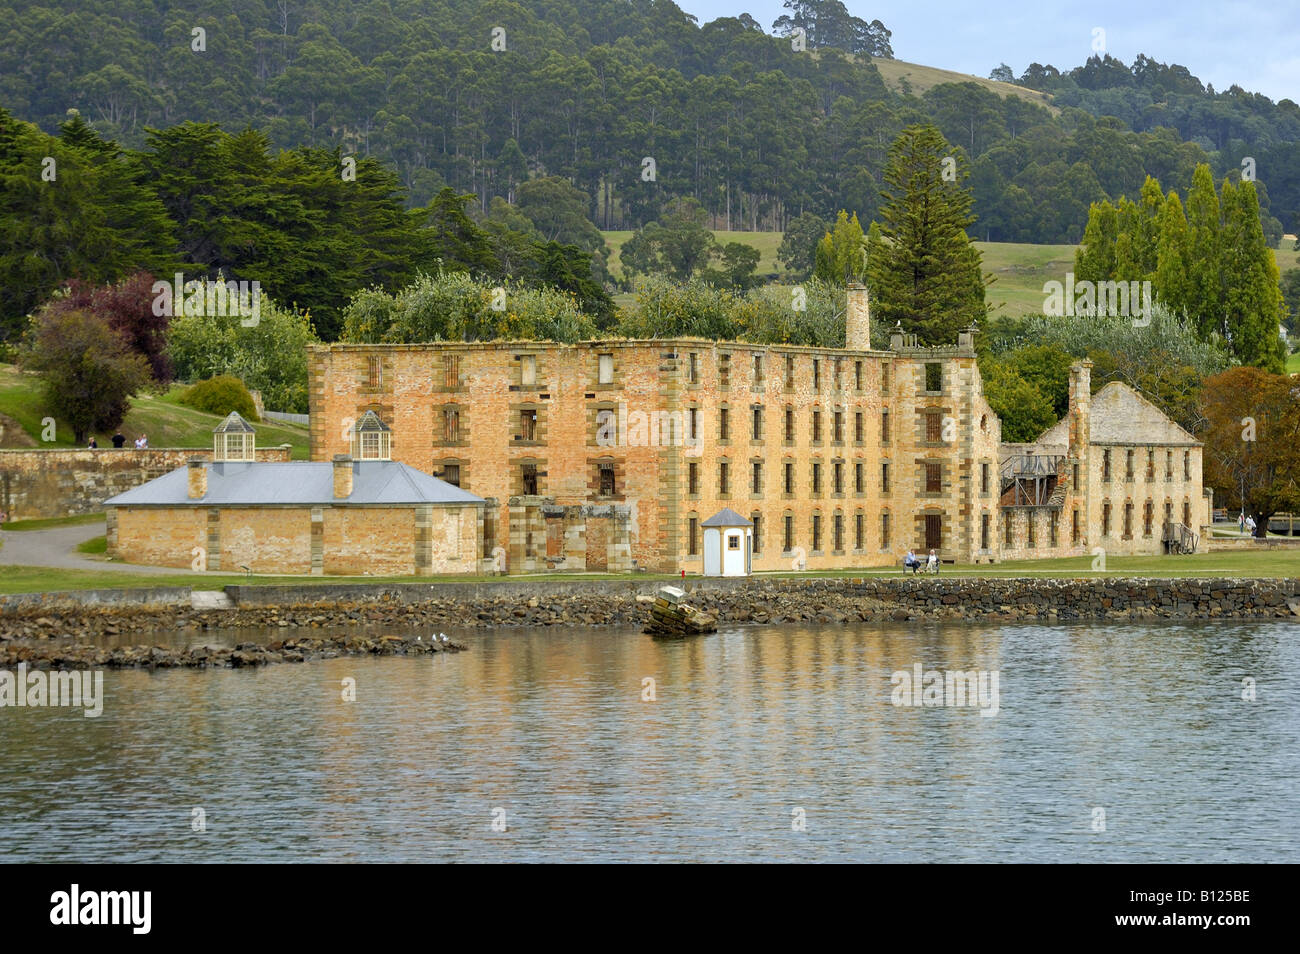 Port Arthur penitentiary, from the water. Stock Photo